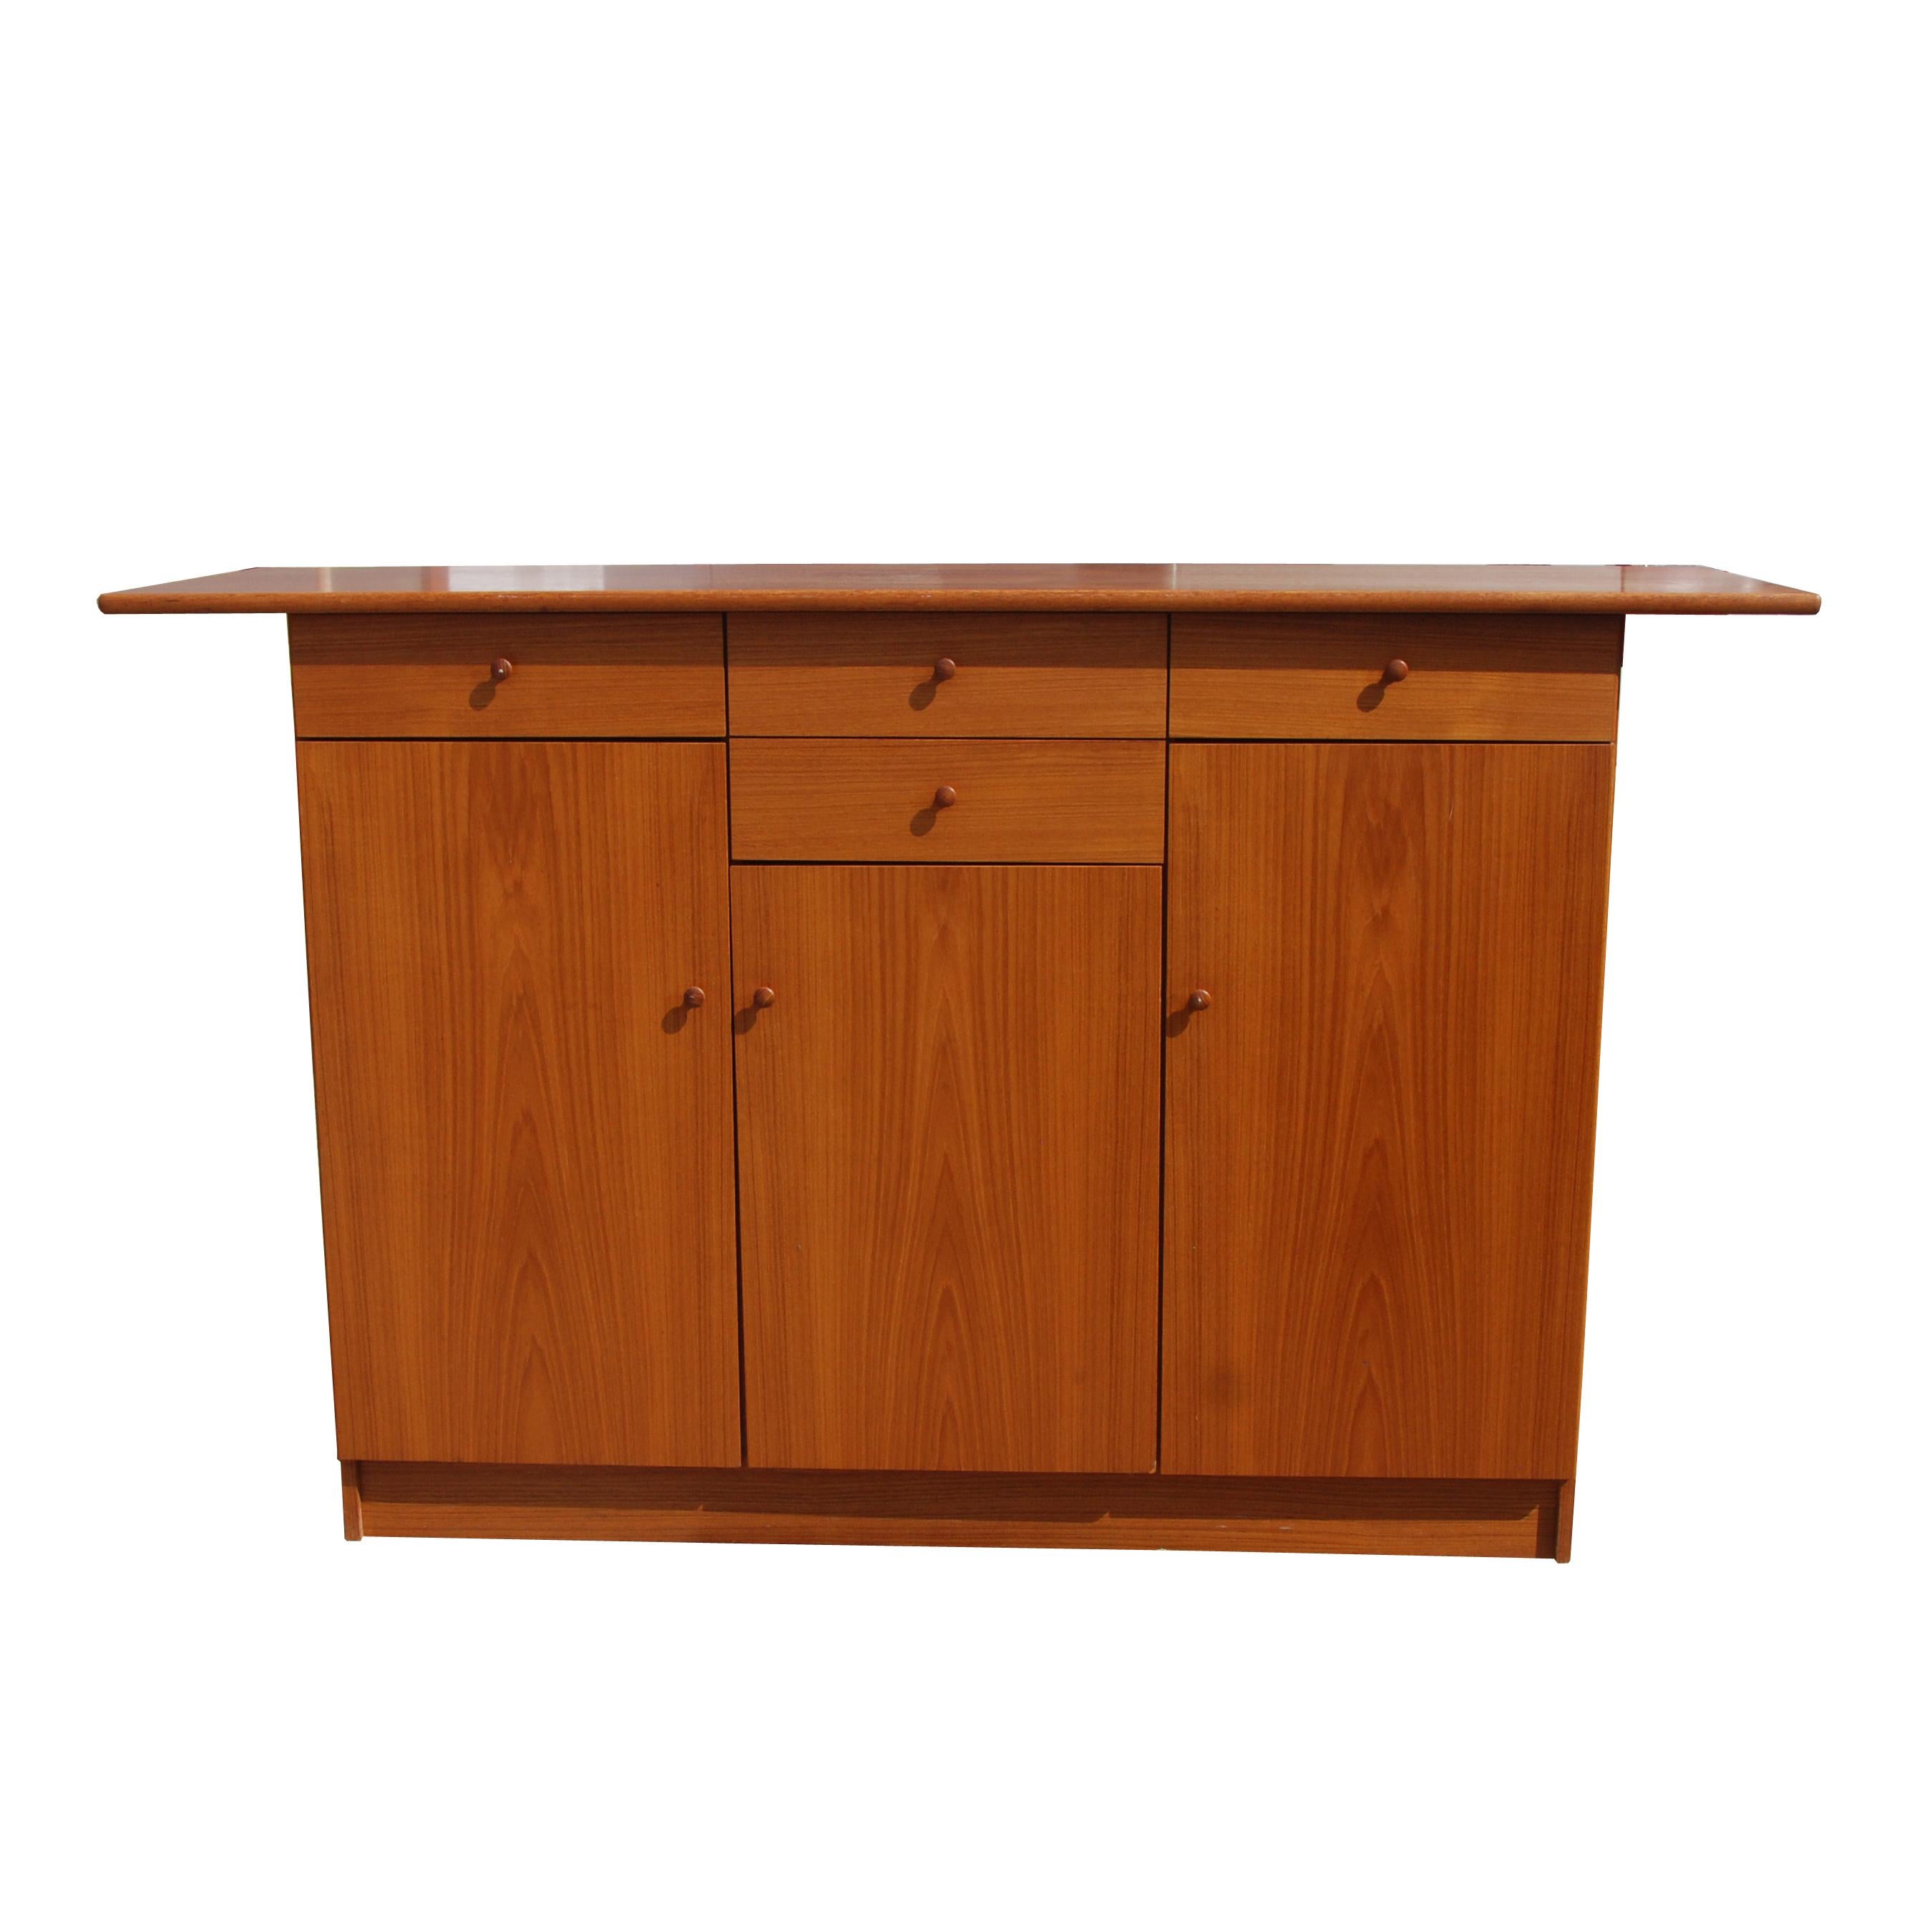 Midcentury Scandinavian teak buffet

Four spacious drawers for flatware
Three cabinets with four individual shelves

Measures: 65